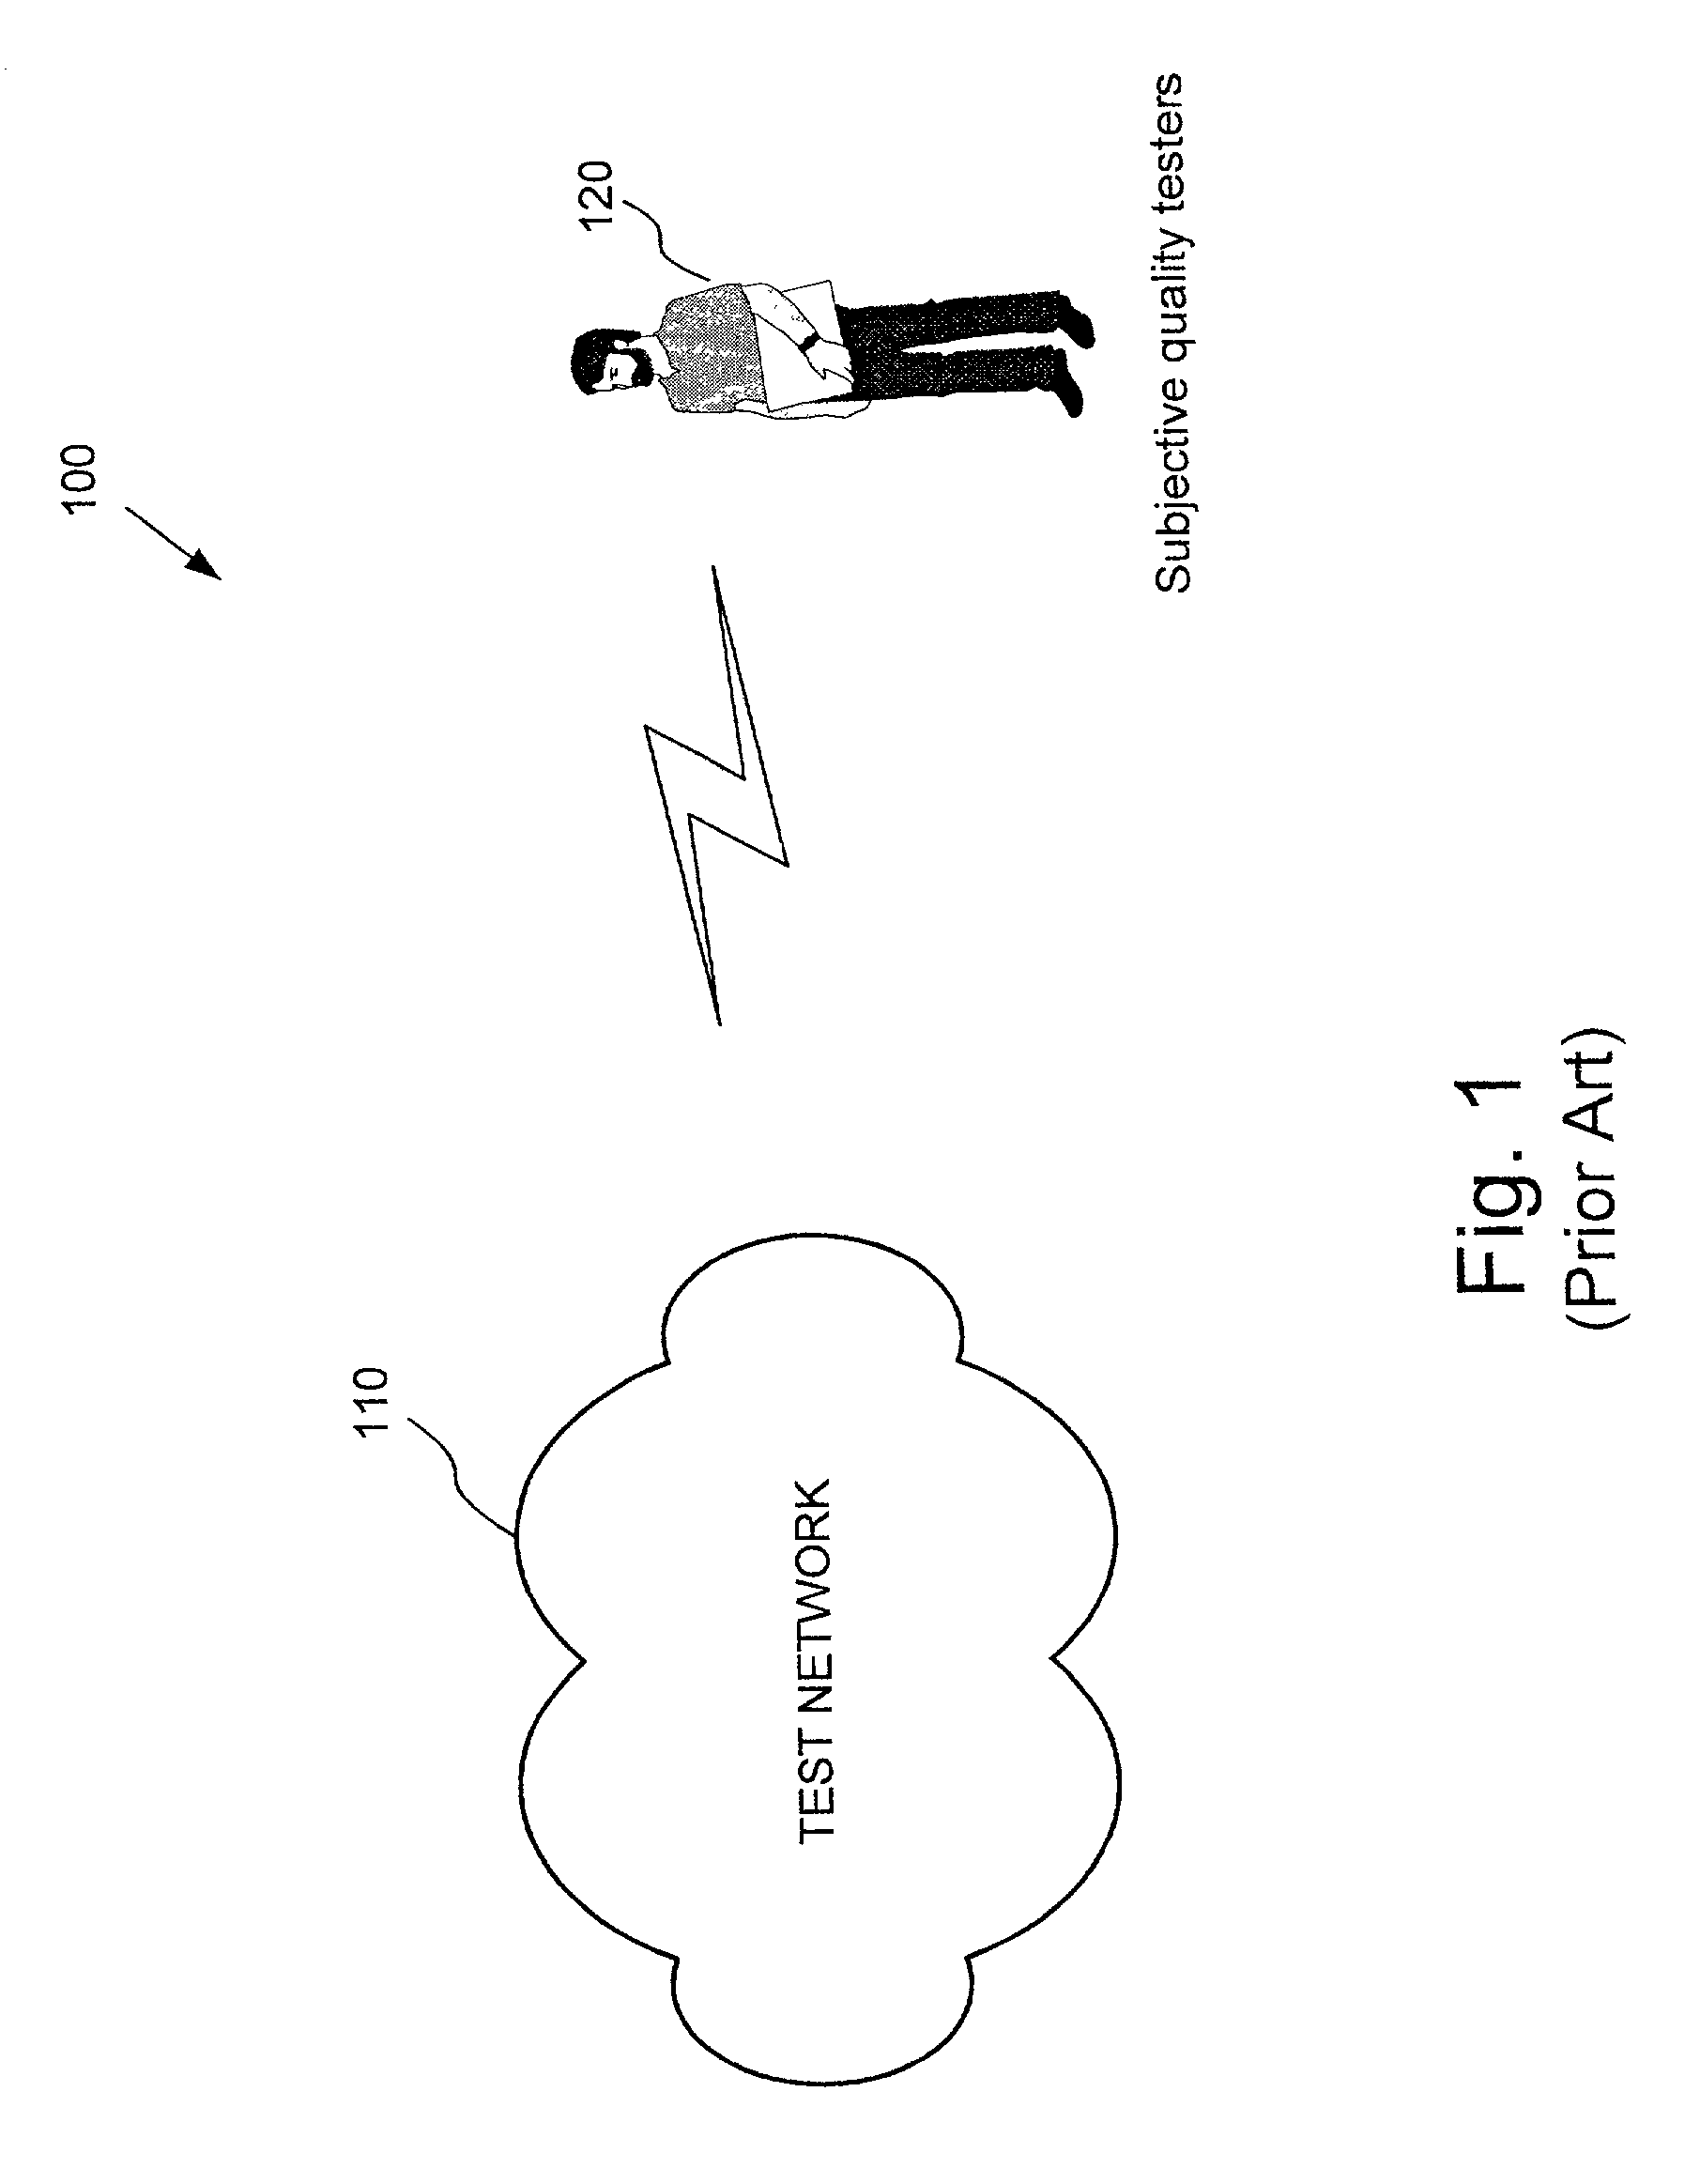 Systems and methods for automatic evaluation of subjective quality of packetized telecommunication signals while varying implementation parameters